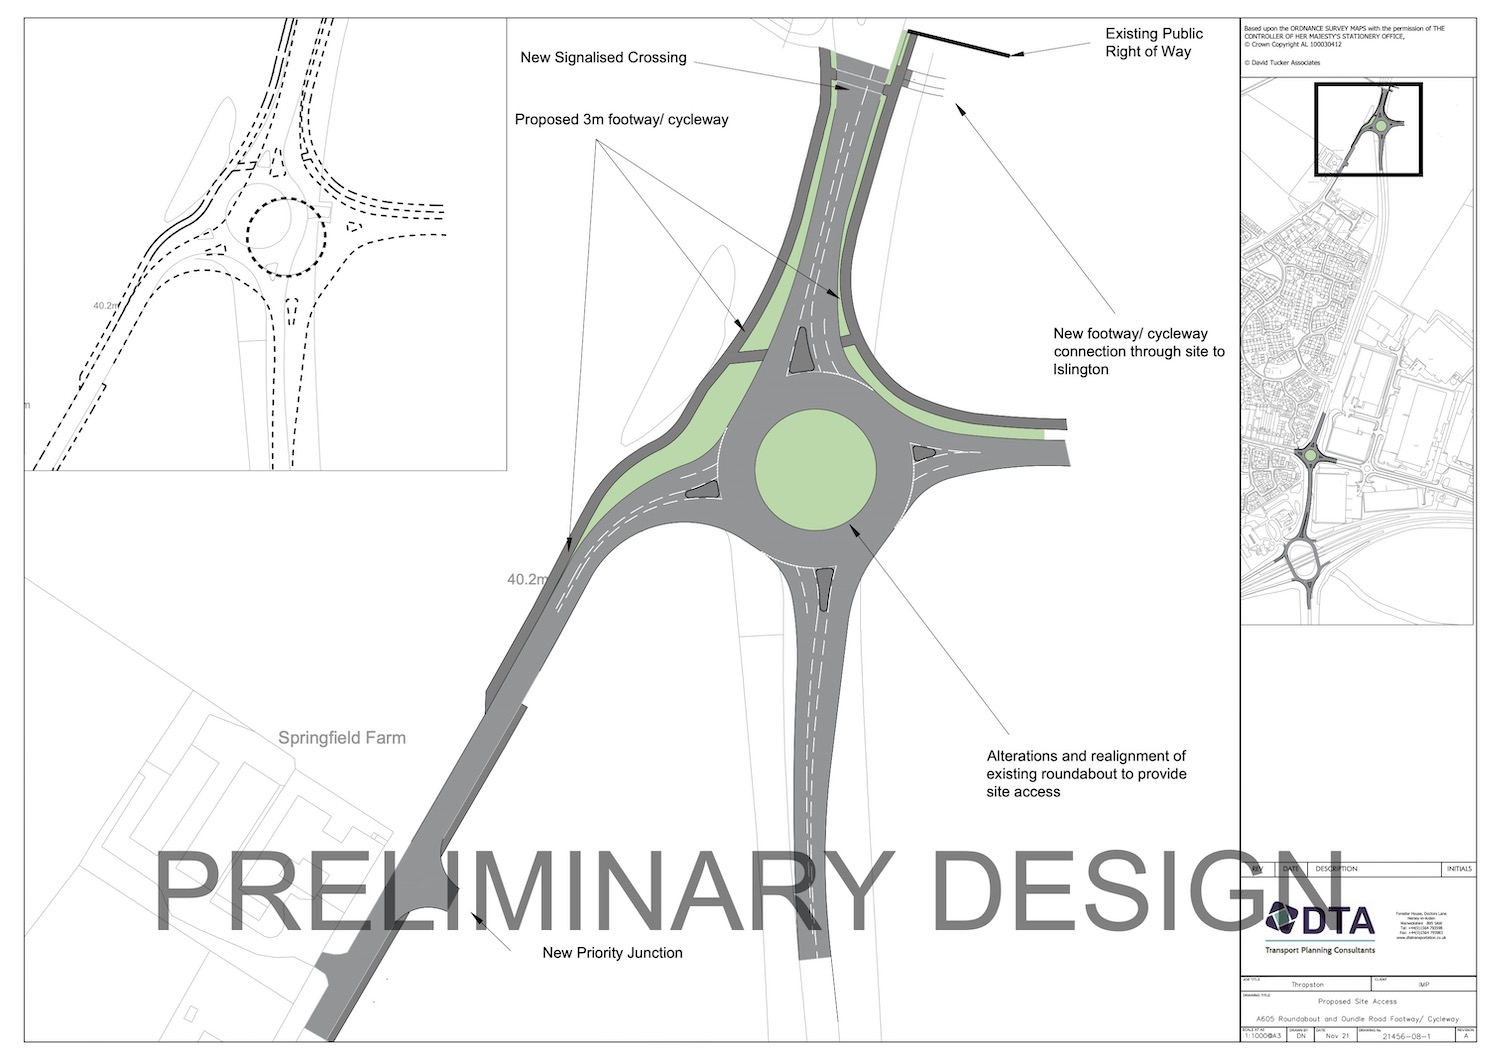 Preliminary design of enhanced access from A605